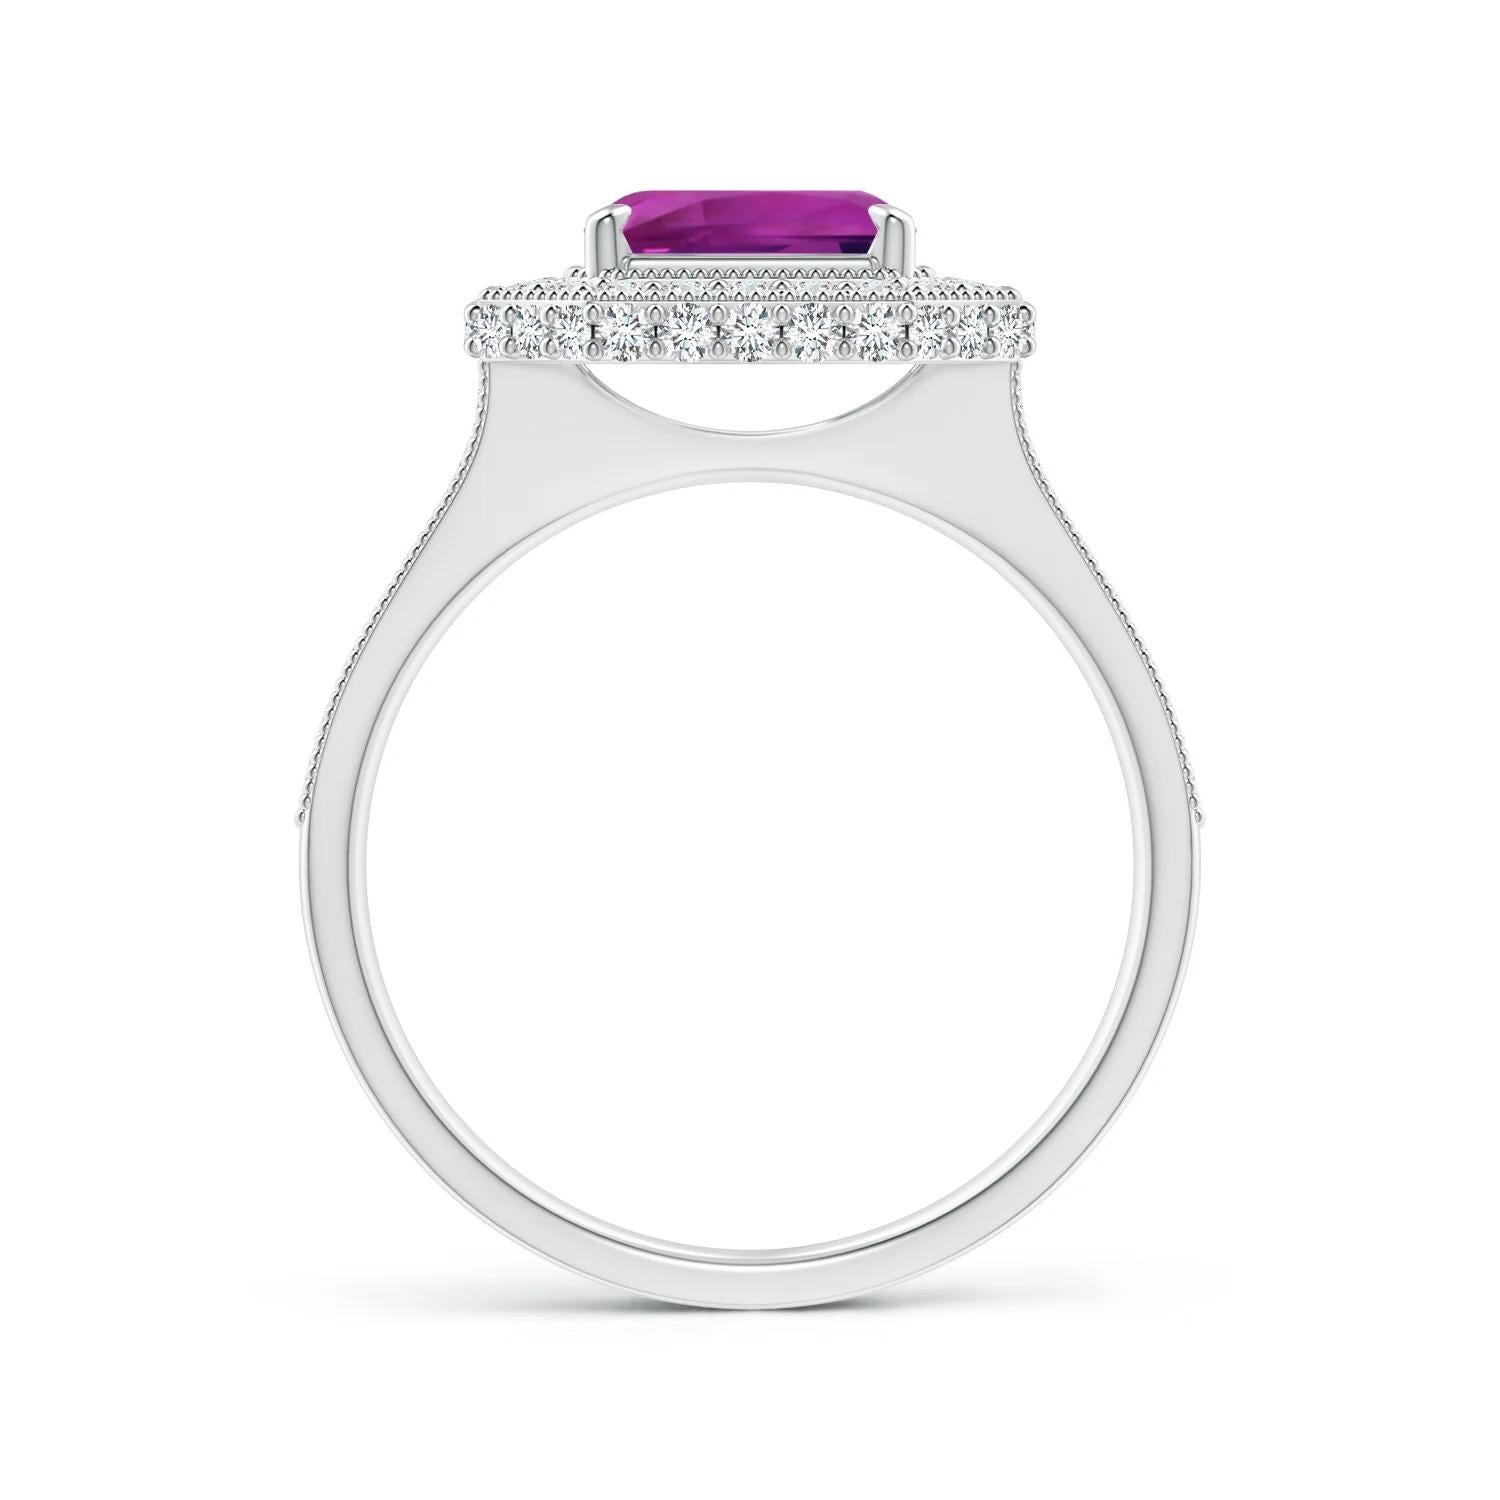 For Sale:  GIA Certified Natural Emerald Cut Pink Sapphire Halo Ring in White Gold 2